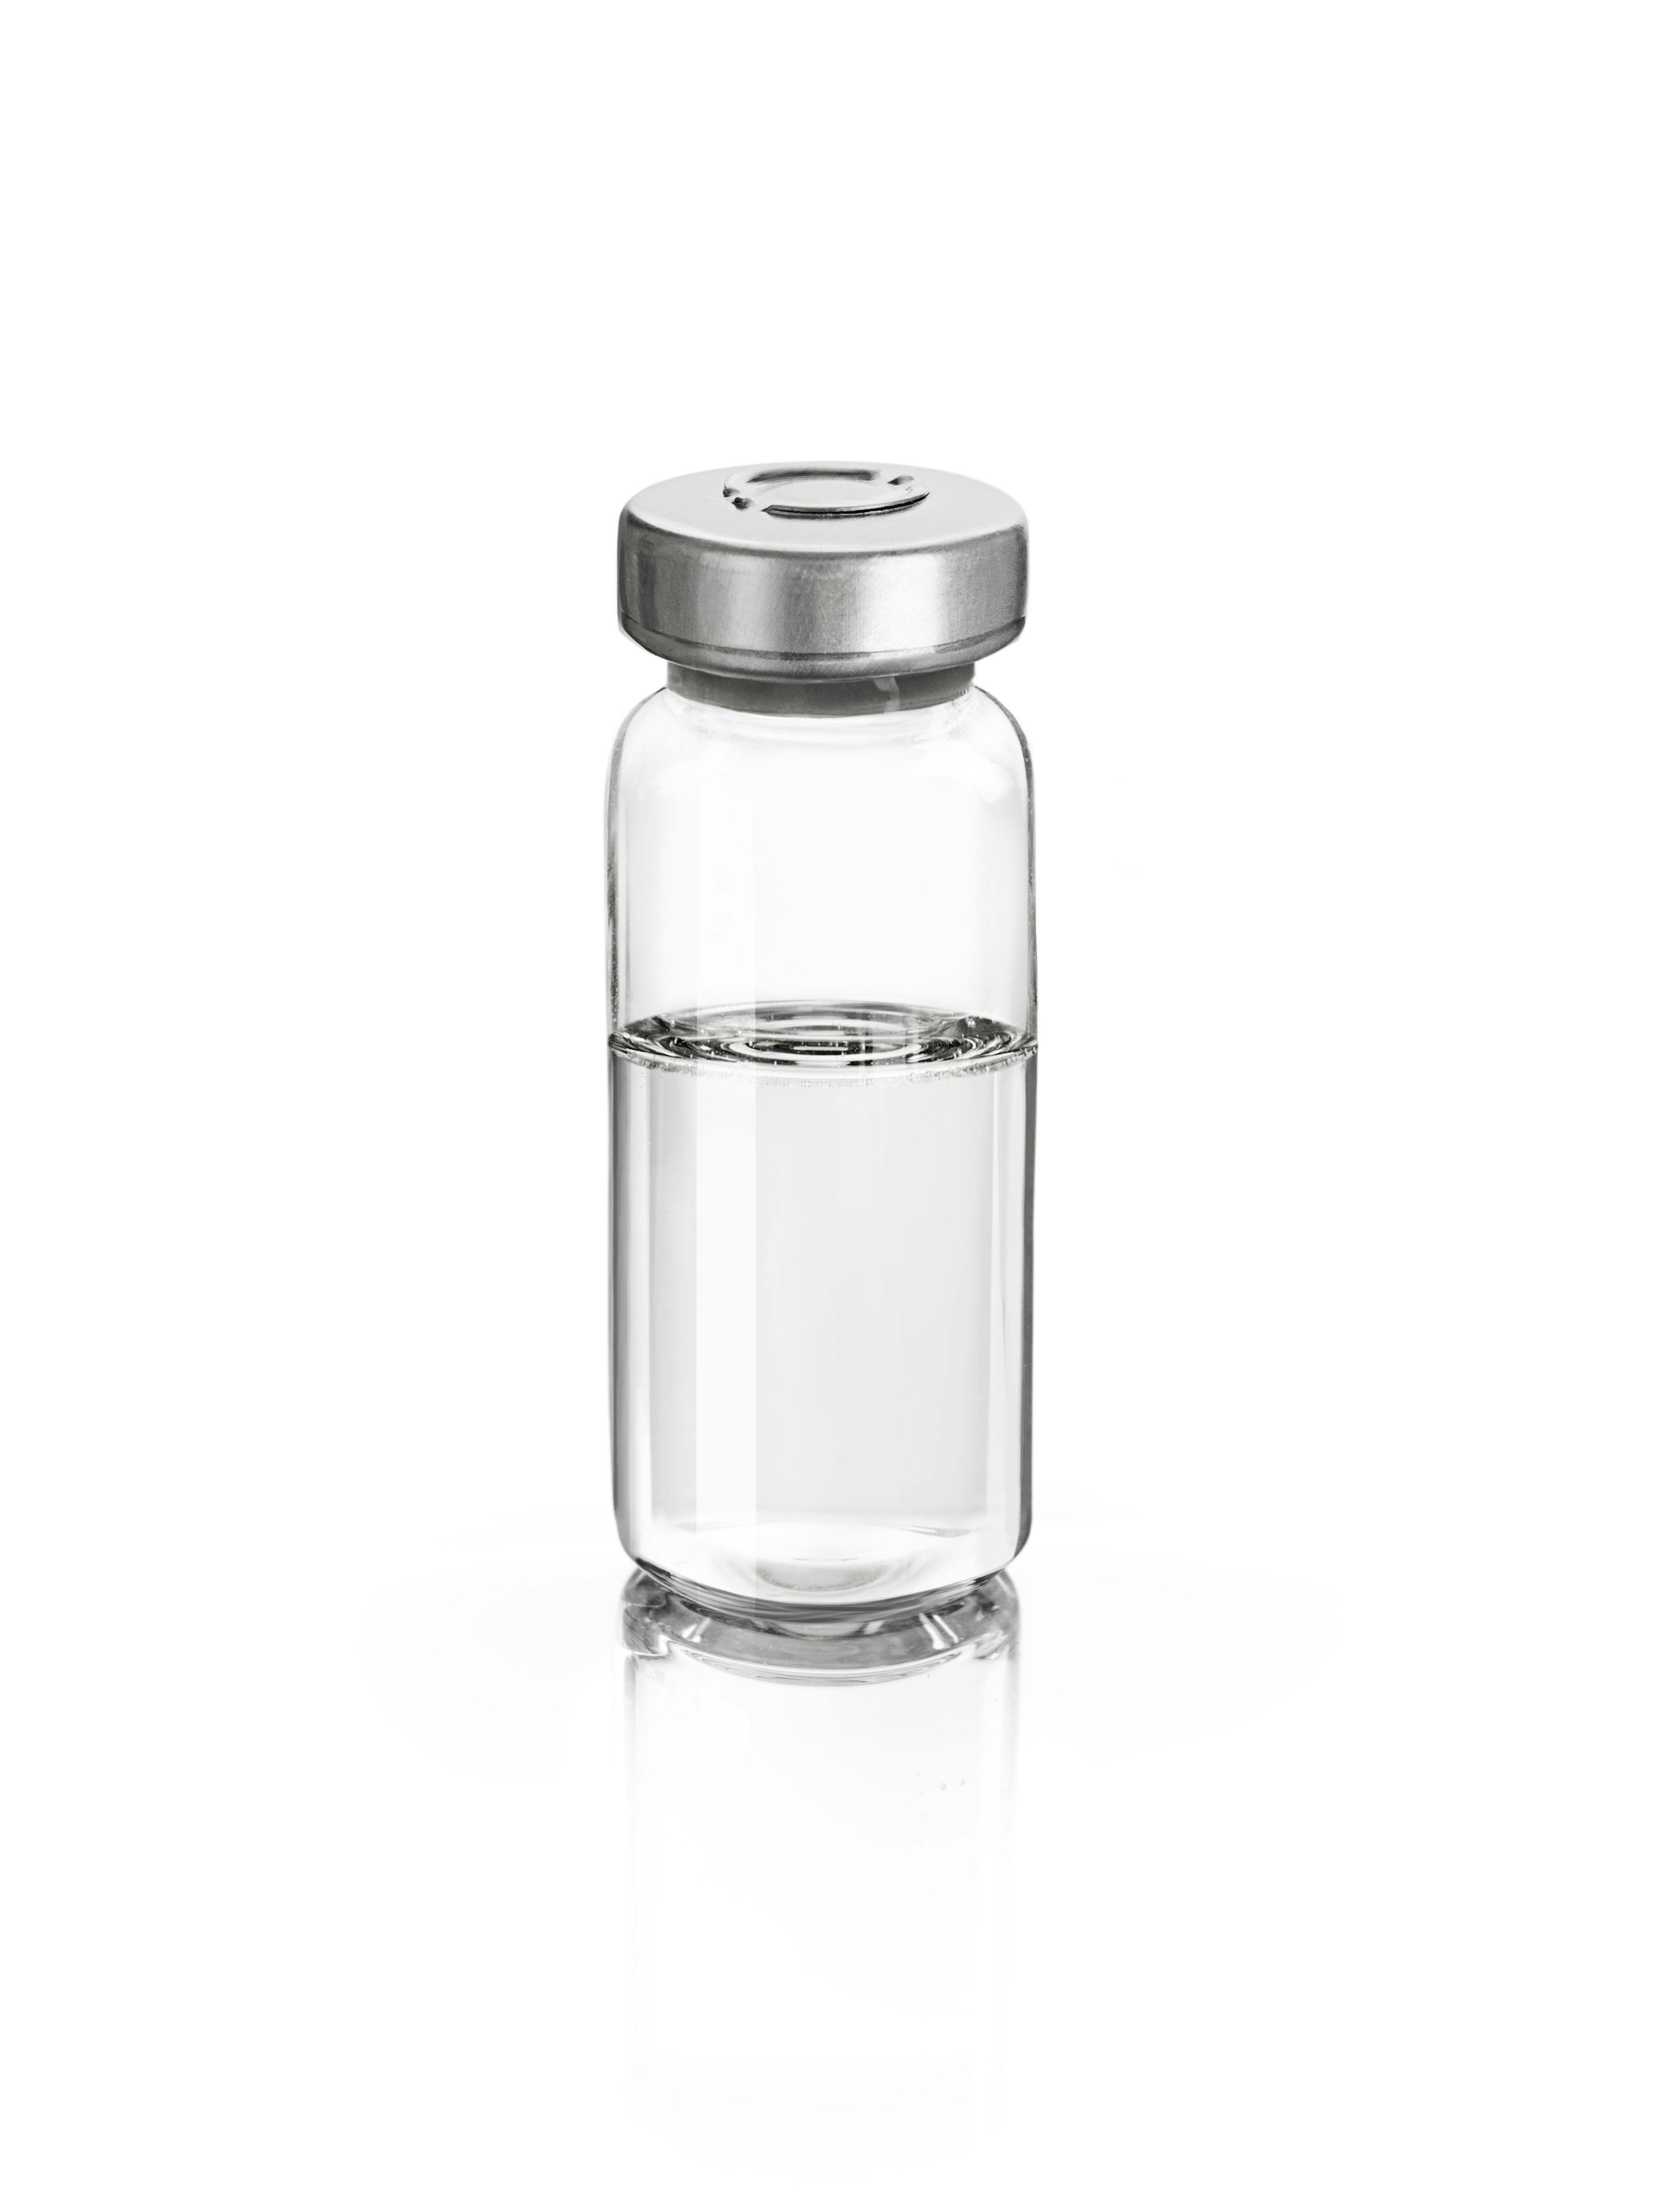 image of a single vial